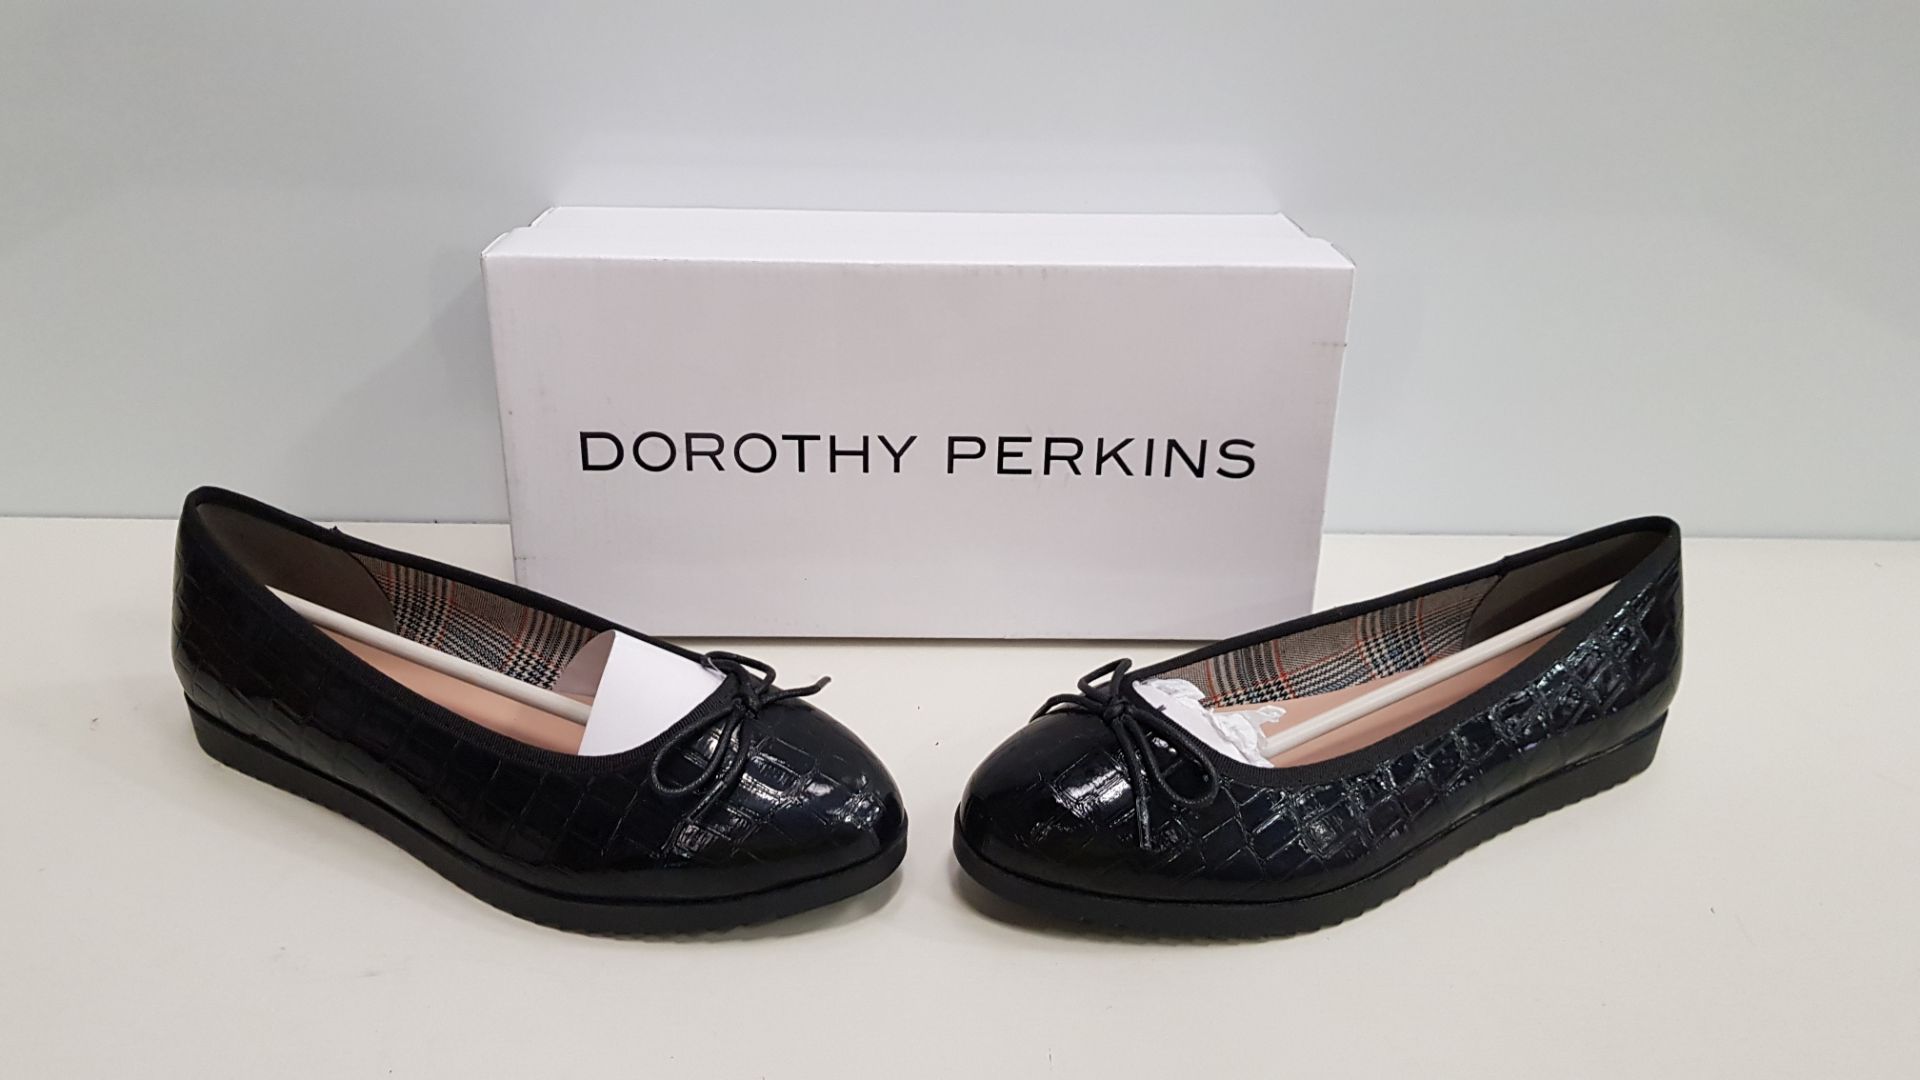 18 X BRAND NEW DOROTHY PERKINS BLACK PANTHA FLAT LEATHER STYLED SHOES UK SIZE 7 RRP £25.00 (TOTAL